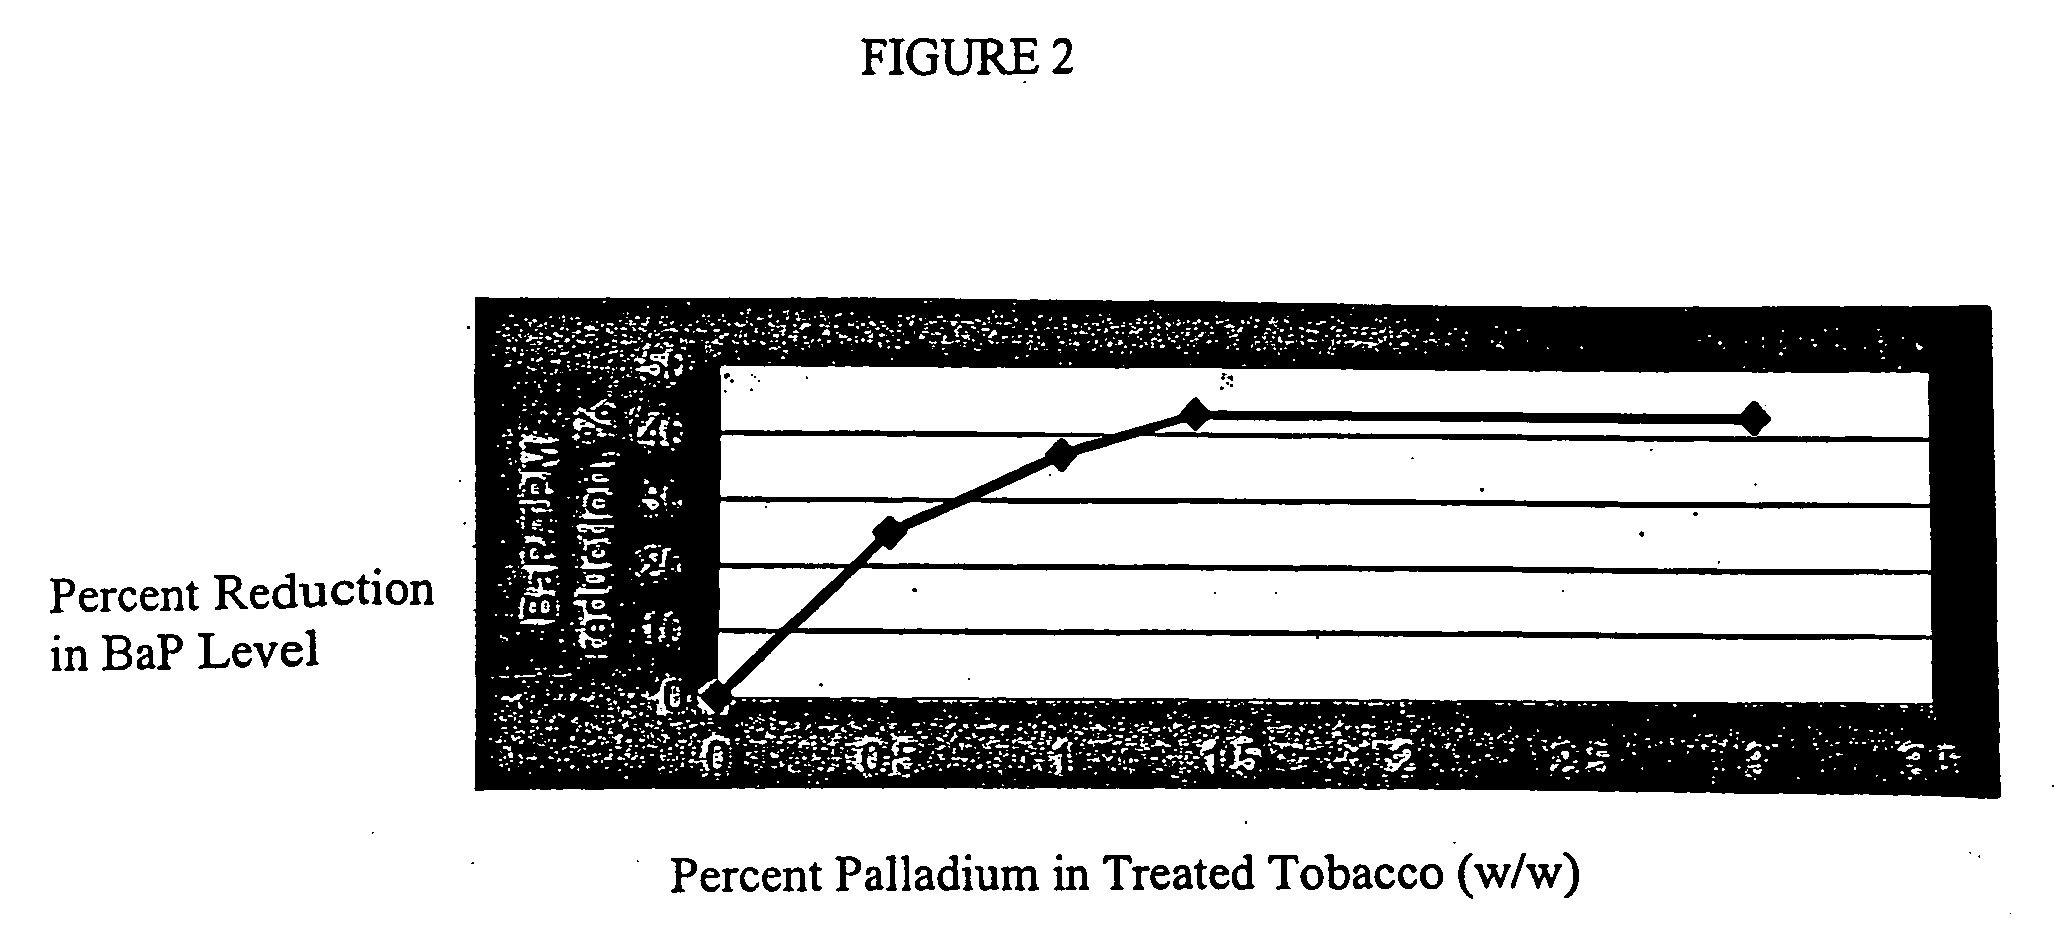 Reduction of polycyclic aromatic hydrocarbons in tobacco smoke using palladium salts